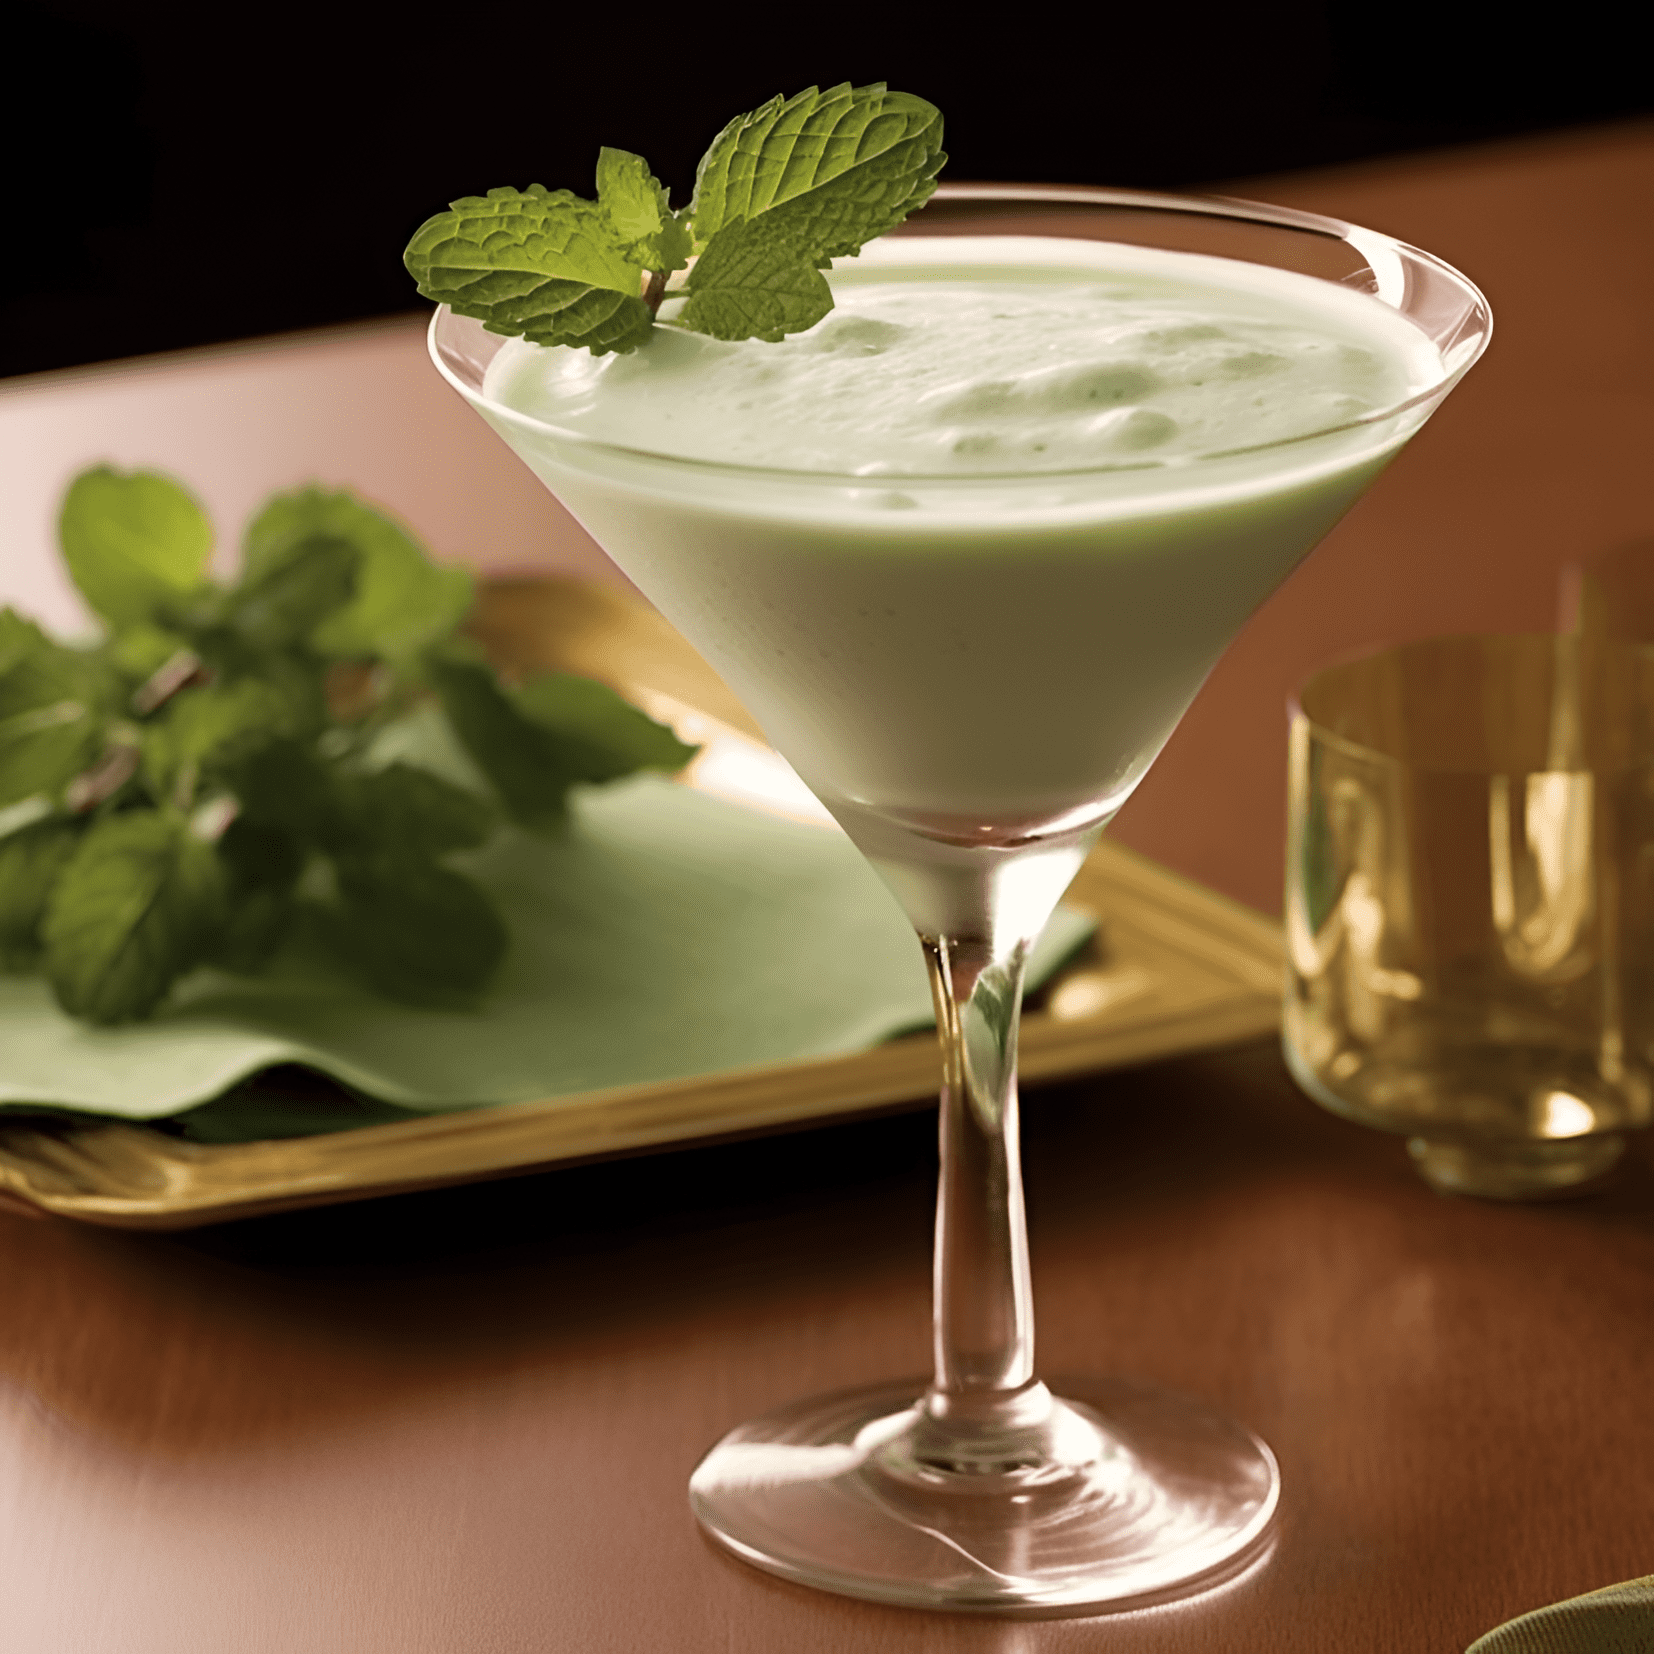 Shamrock Cocktail Recipe - The Shamrock cocktail is a delightful mix of sweet, sour, and creamy flavors. The combination of Irish whiskey, green crème de menthe, and fresh cream creates a smooth, rich taste with a hint of minty freshness.